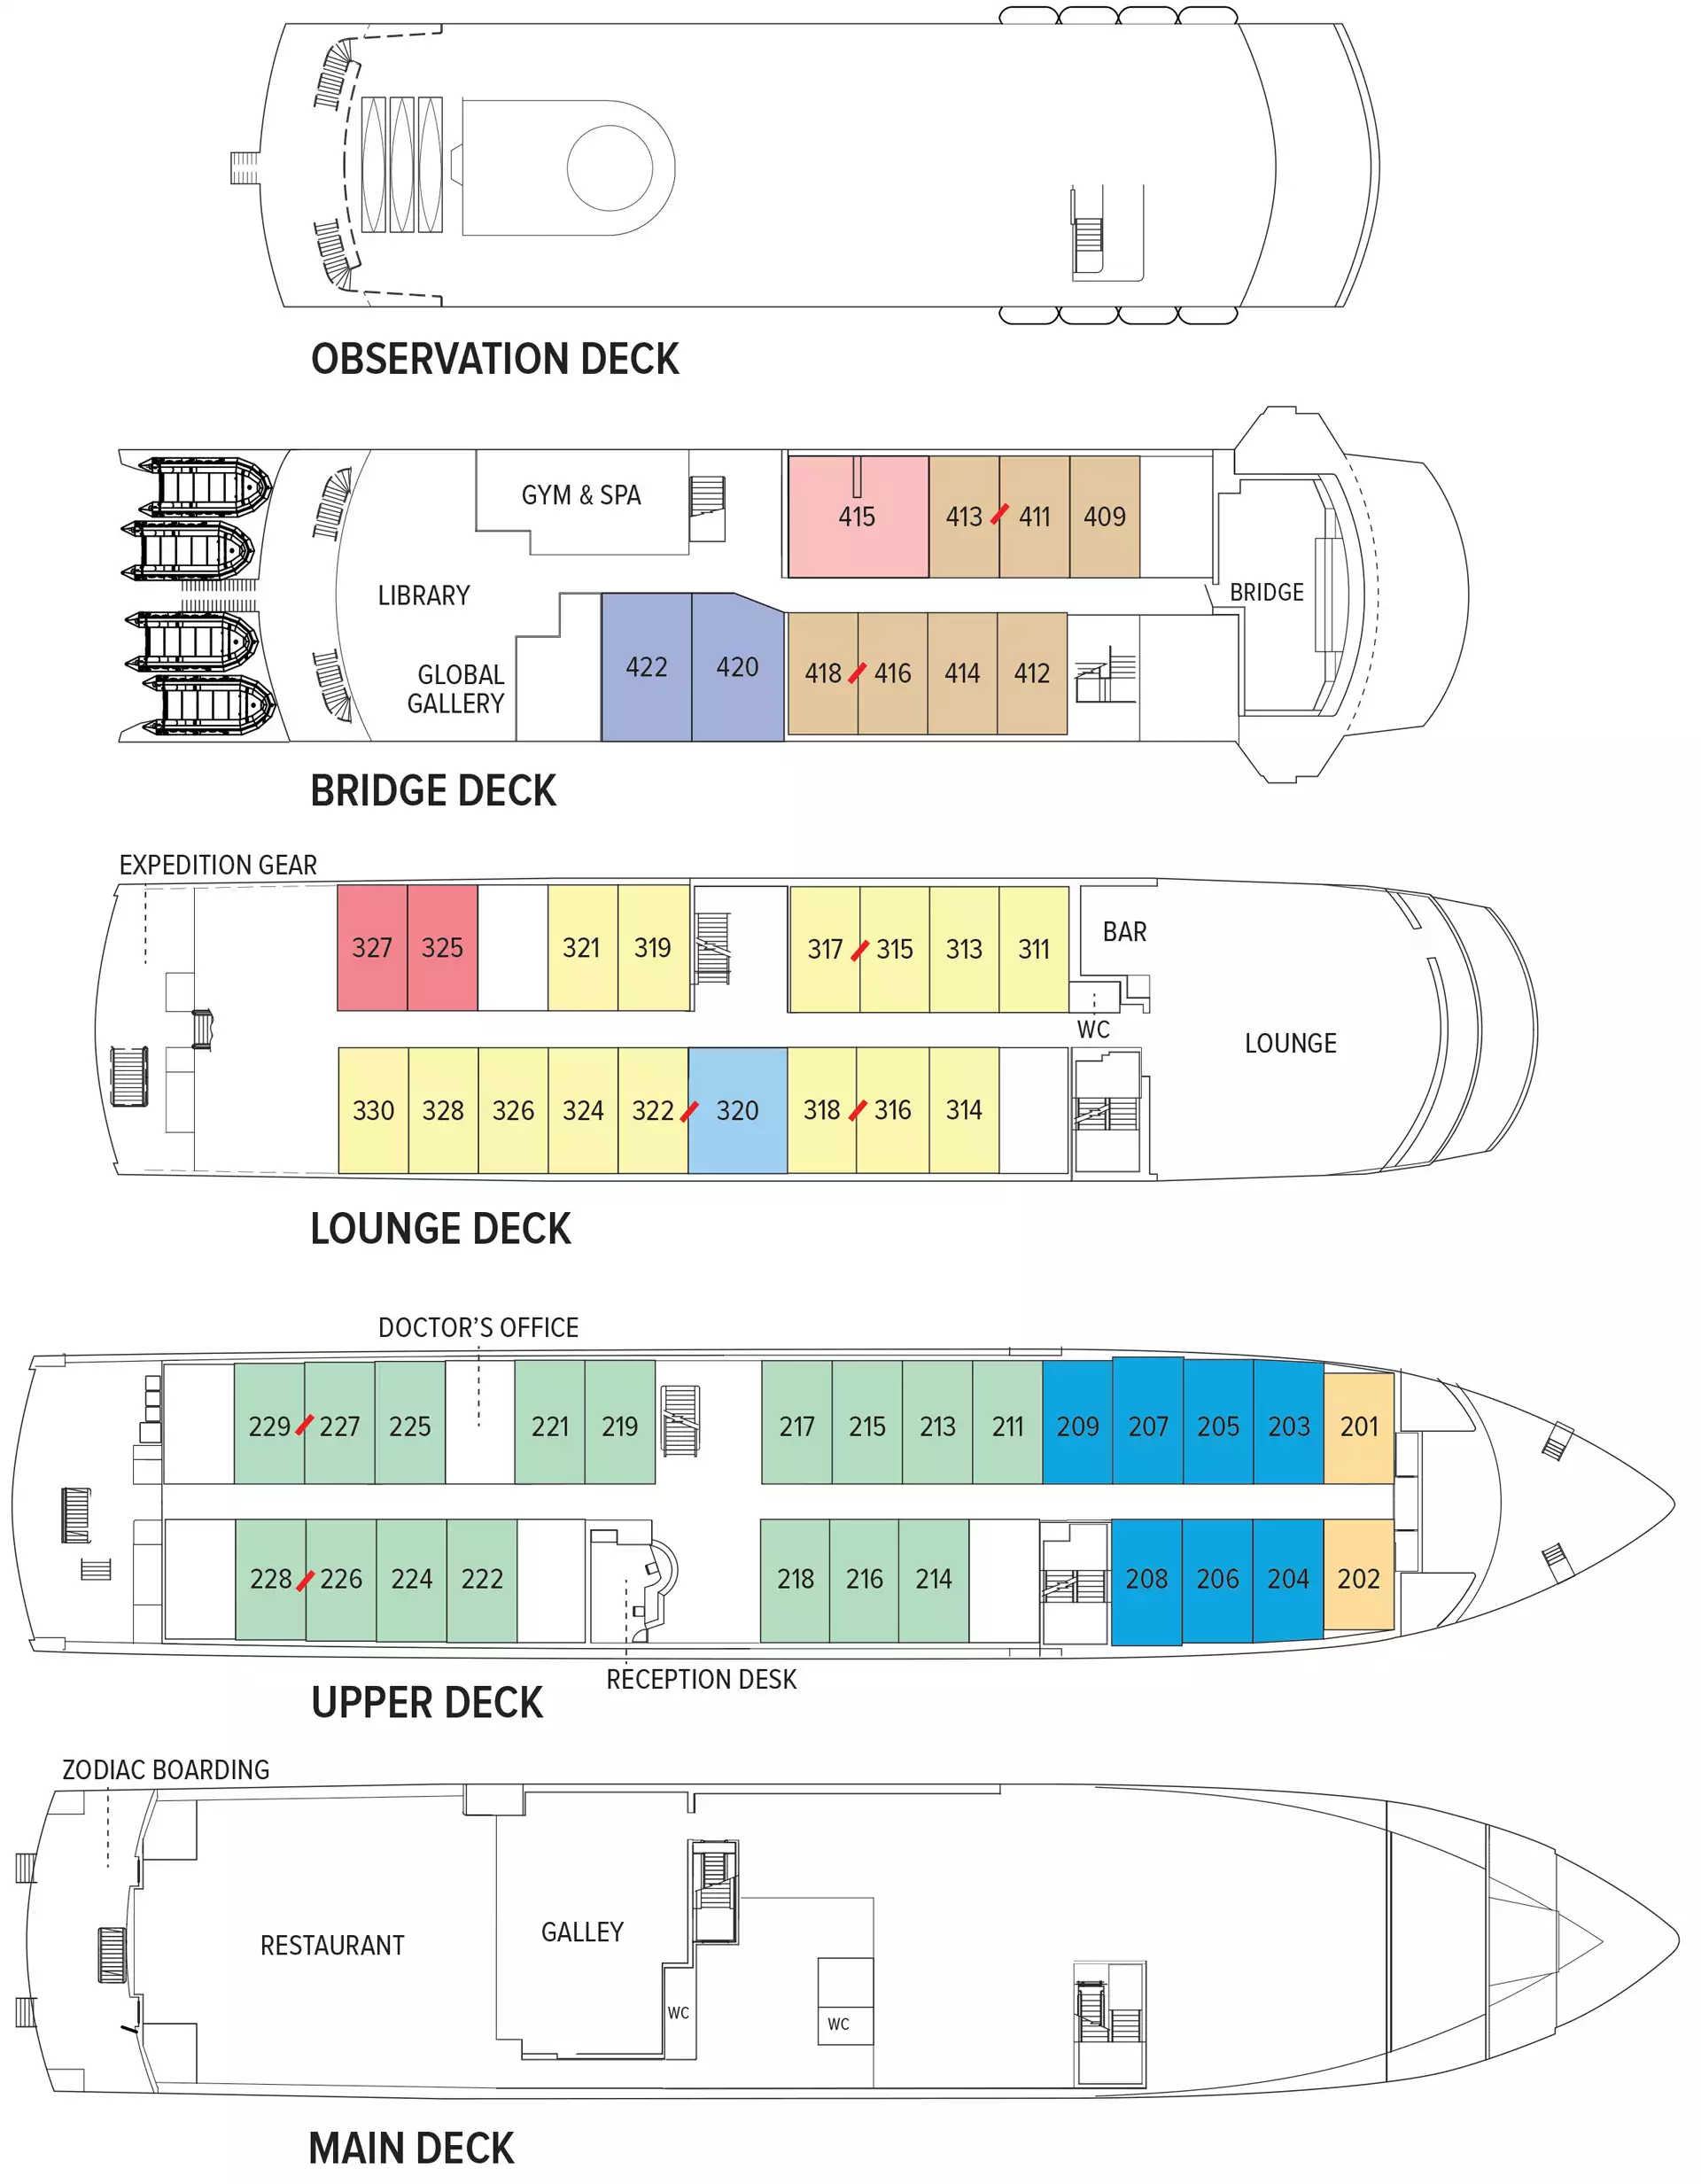 Deck plan showing Main Deck, Upper Deck, Lounge Deck, Bridge Deck and Observation Deck of Endeavour II Galapagos Islands expedition ship.